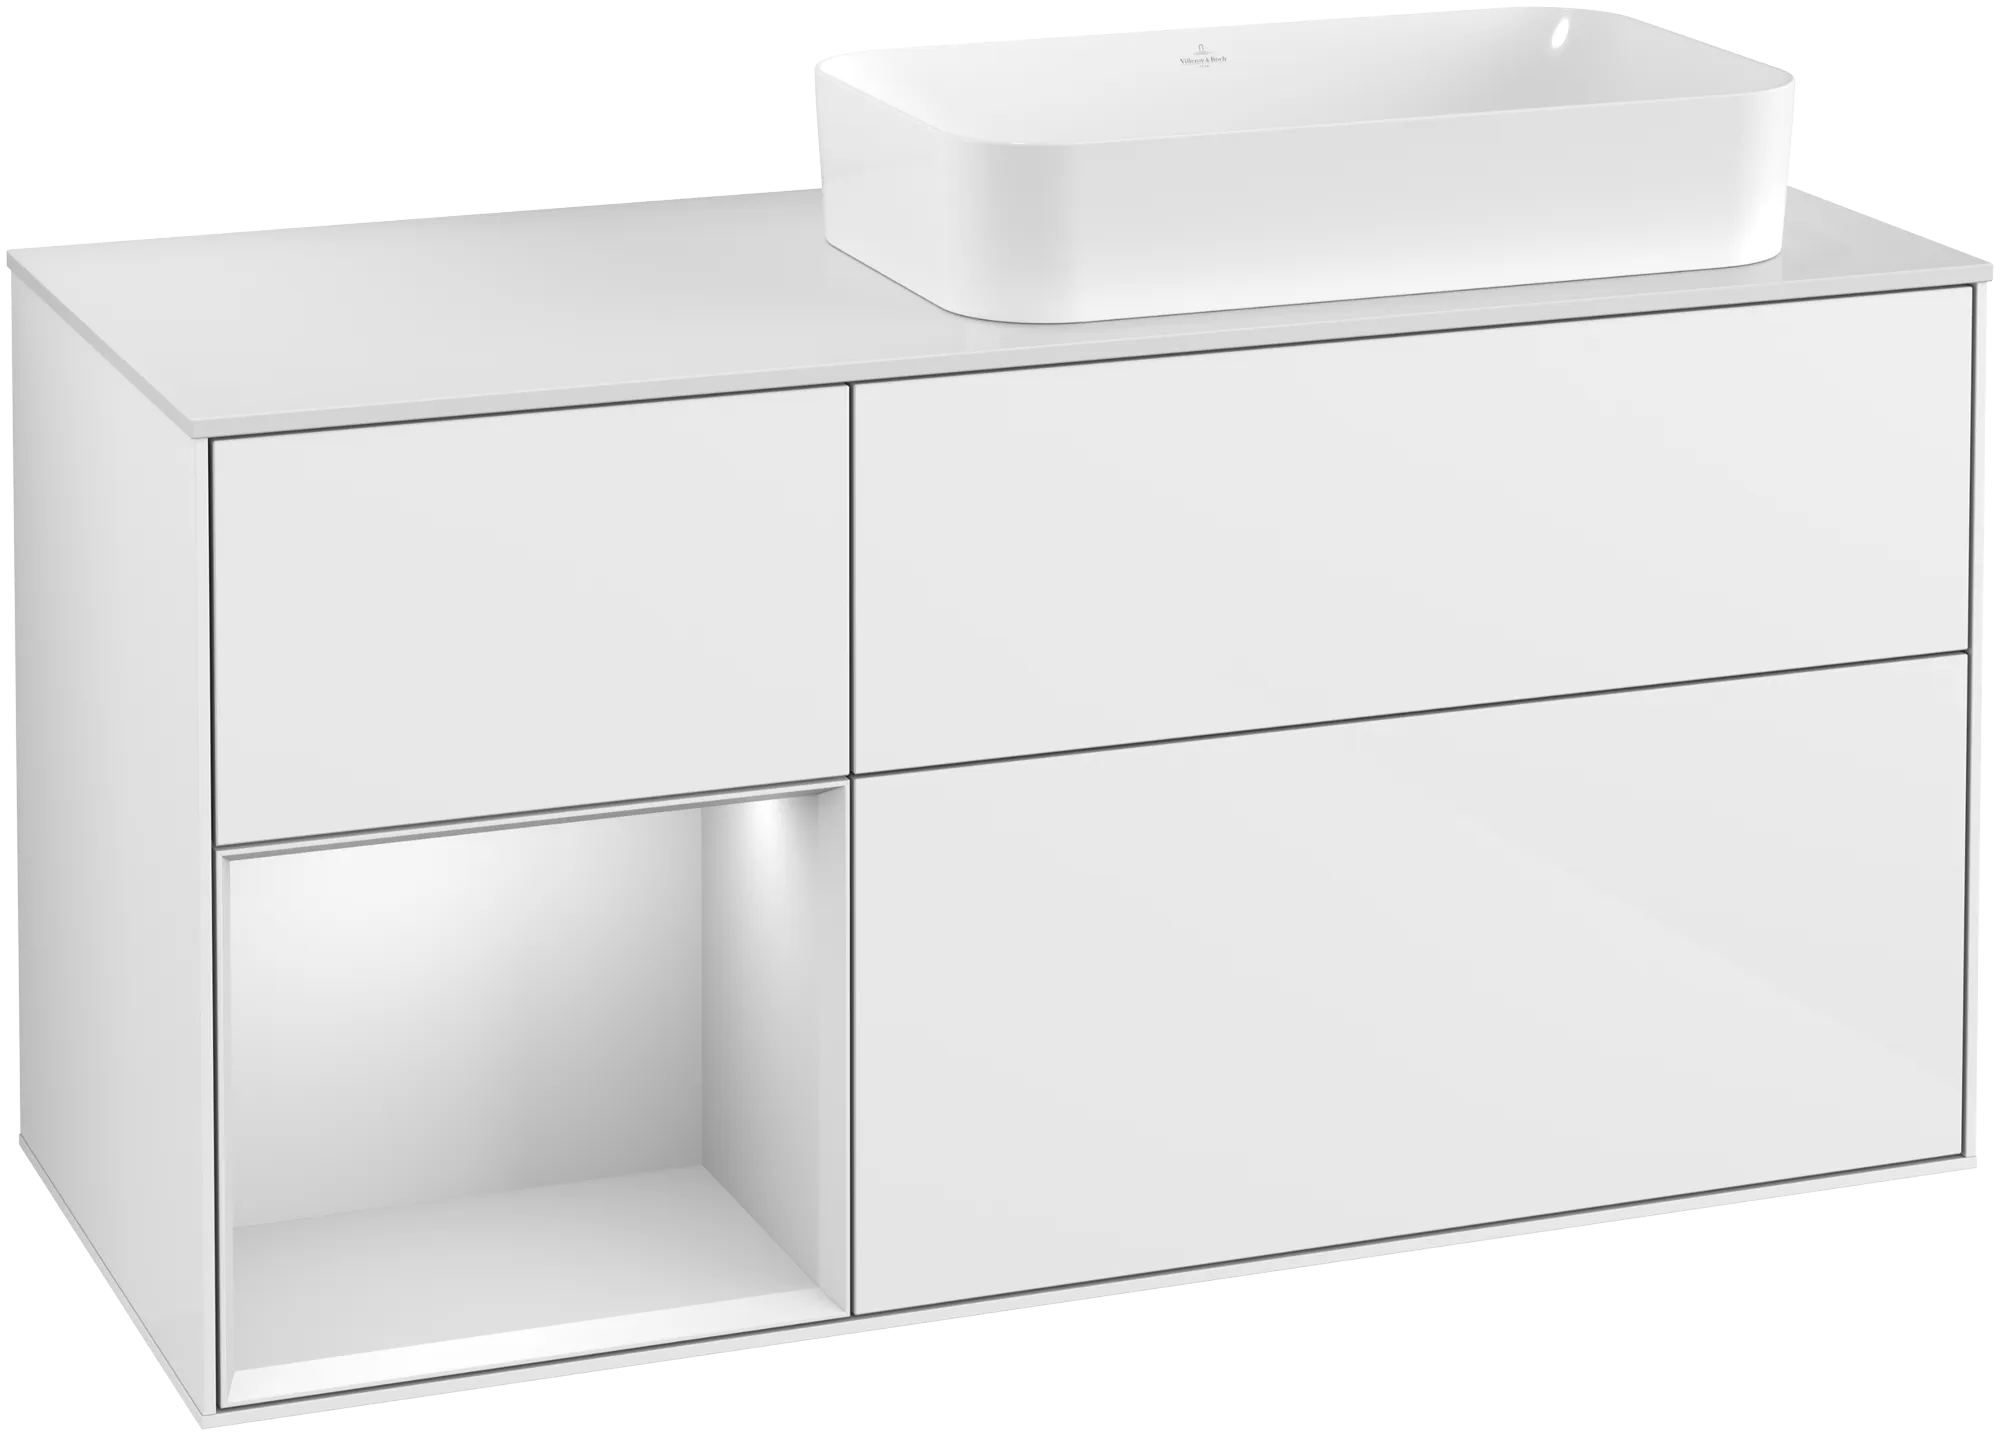 Obrázek VILLEROY BOCH Finion Vanity unit, with lighting, 3 pull-out compartments, 1200 x 603 x 501 mm, Glossy White Lacquer / White Matt Lacquer / Glass White Matt #G271MTGF